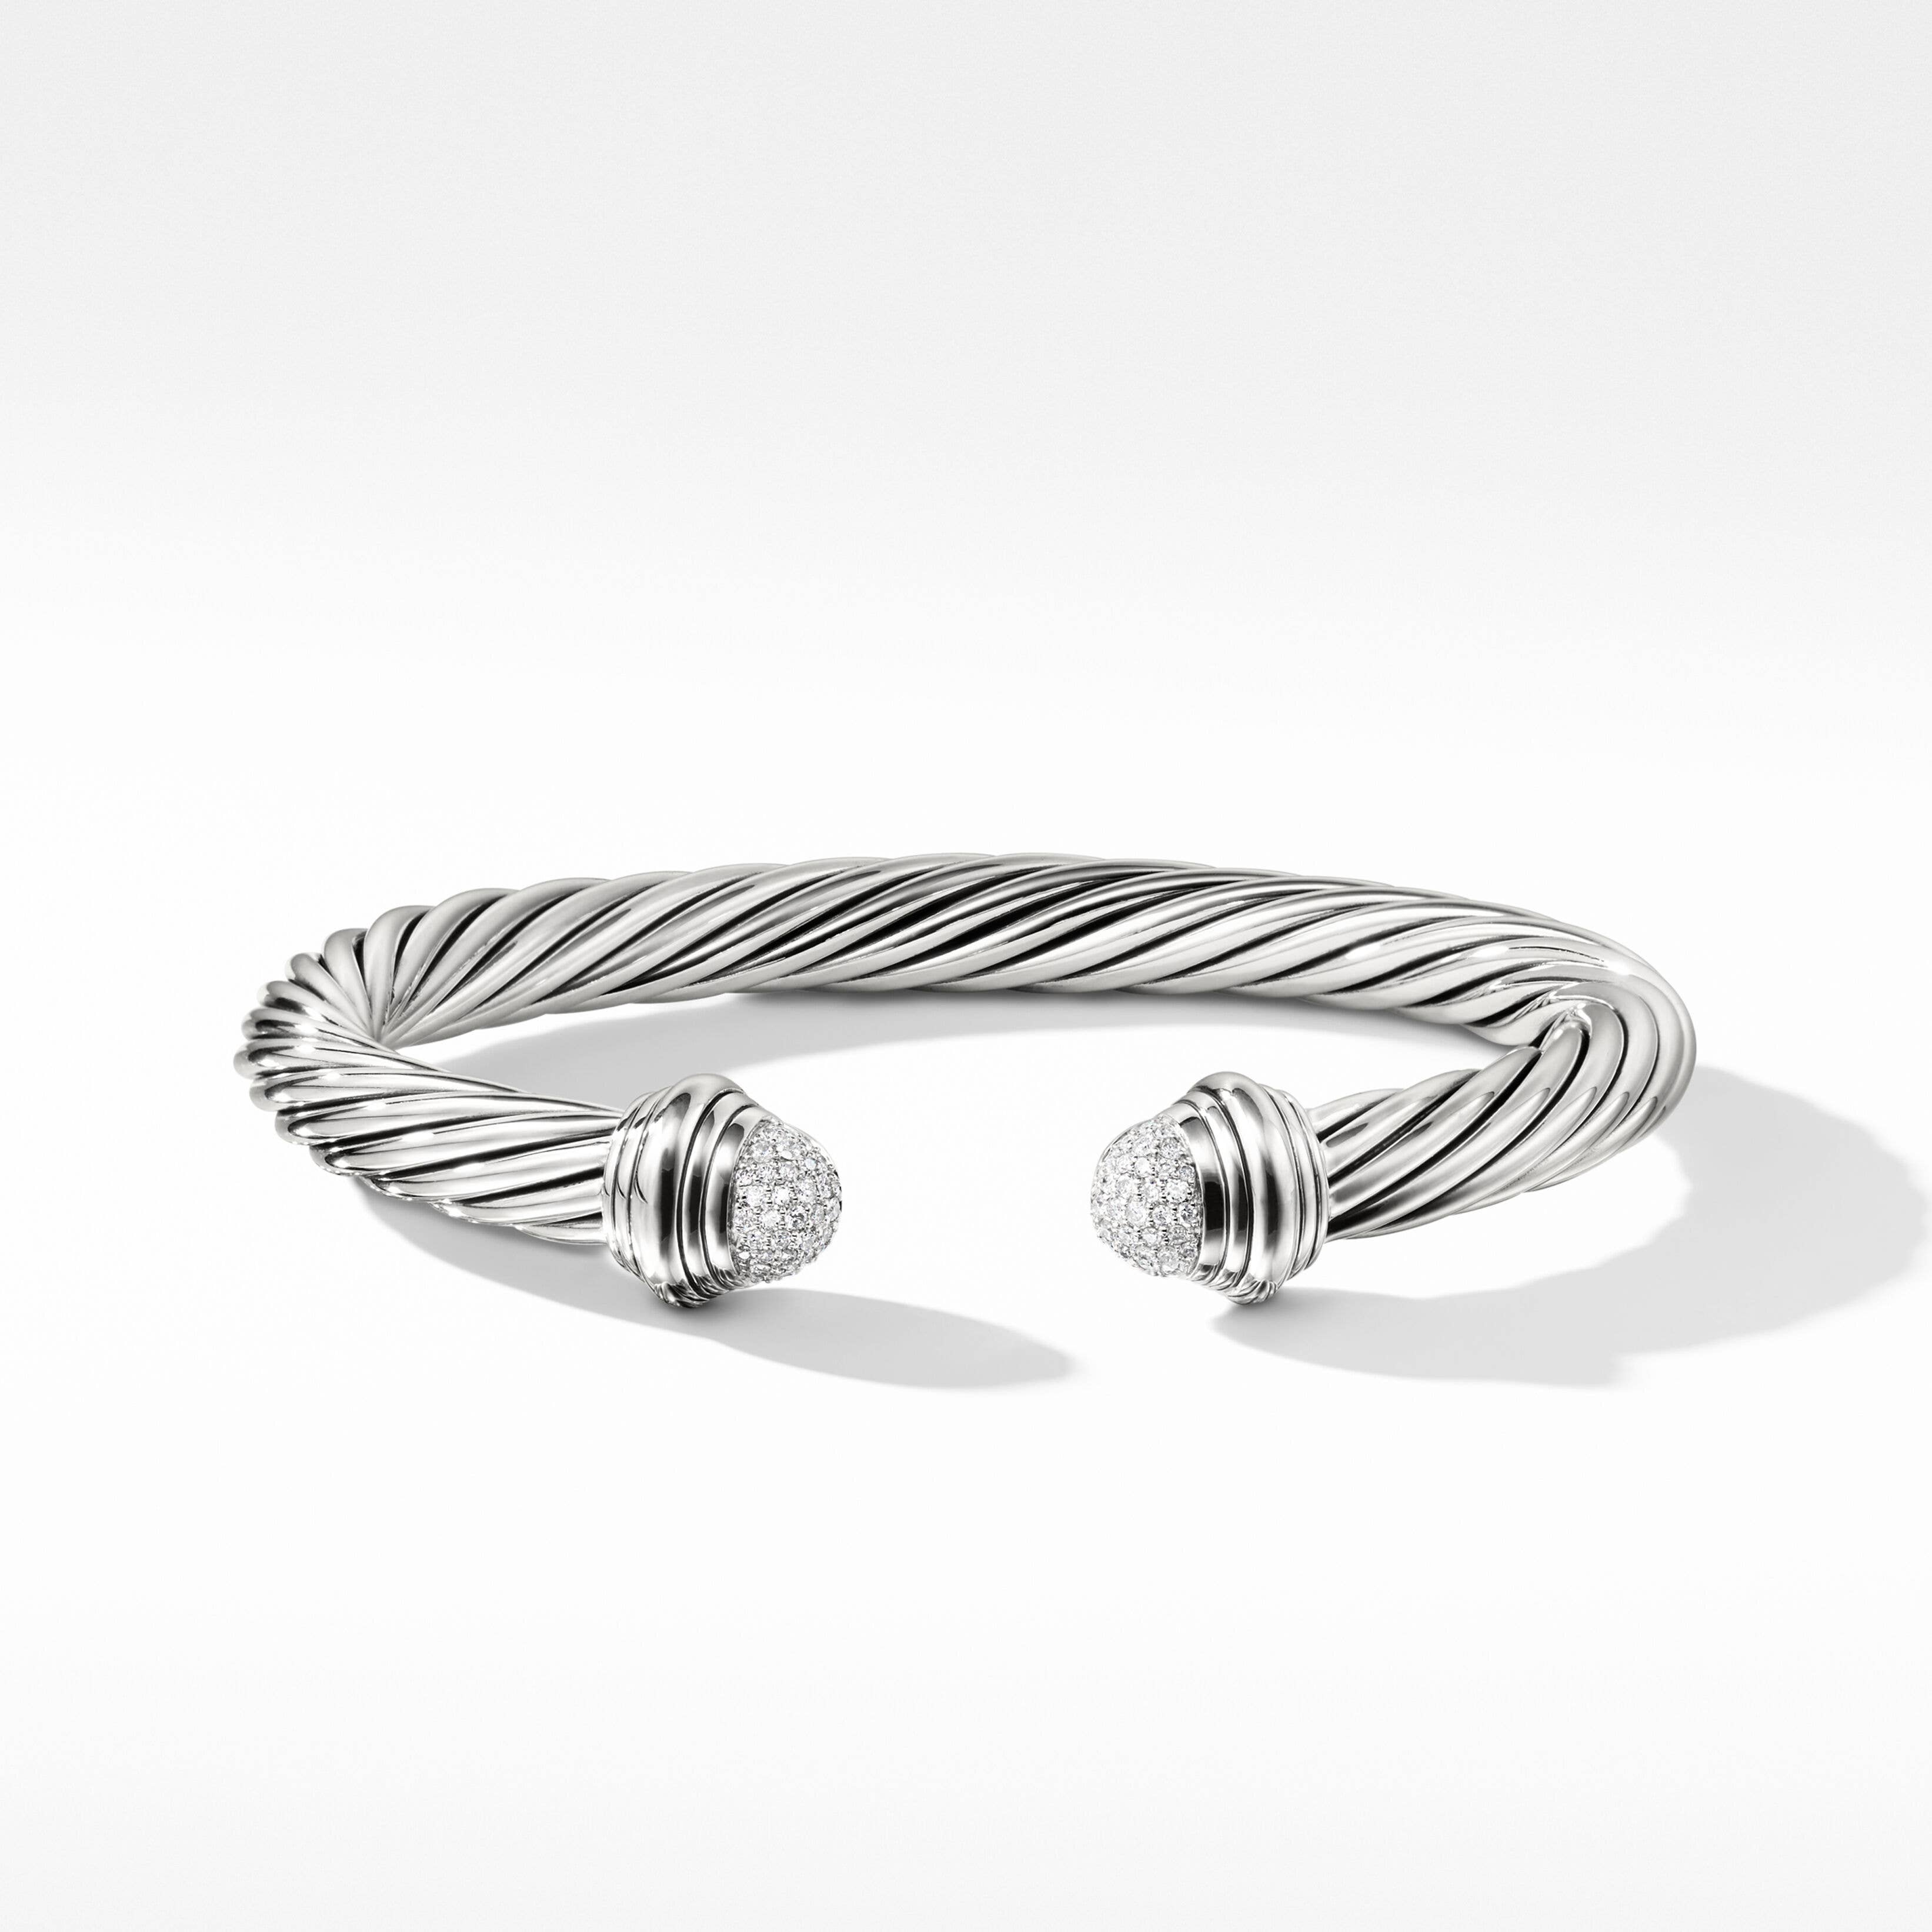 Cable Classics Bracelet in Sterling Silver with Pavé Diamond Domes